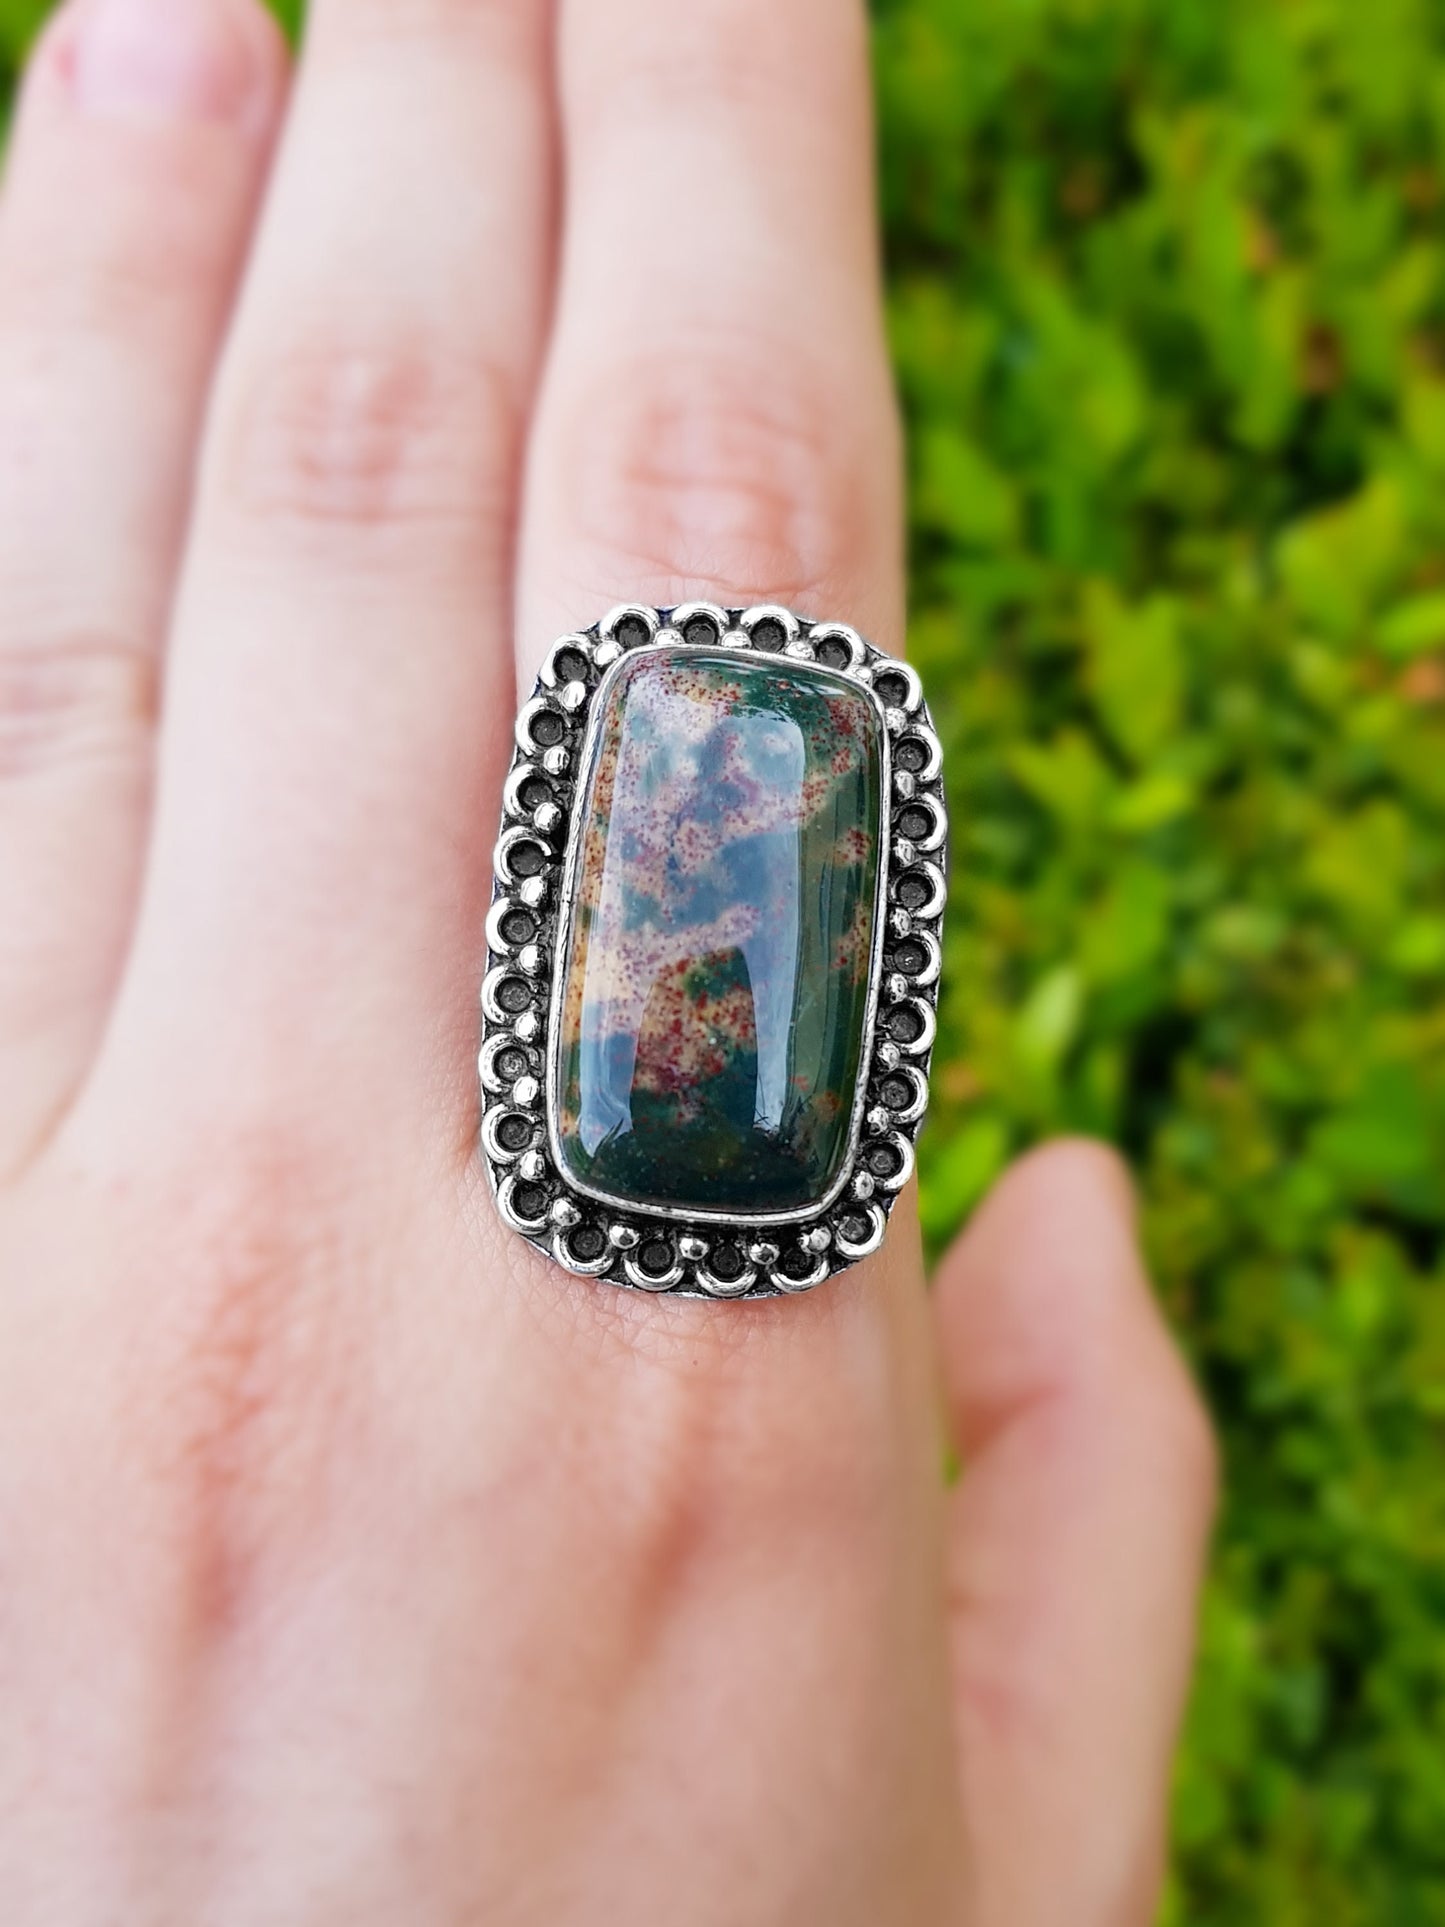 Bloodstone Birthstone Ring Size US 9 Sterling Silver Boho Ring Unisex Ring One Of A Kind Gift GypsyJewelry Crystal Ring